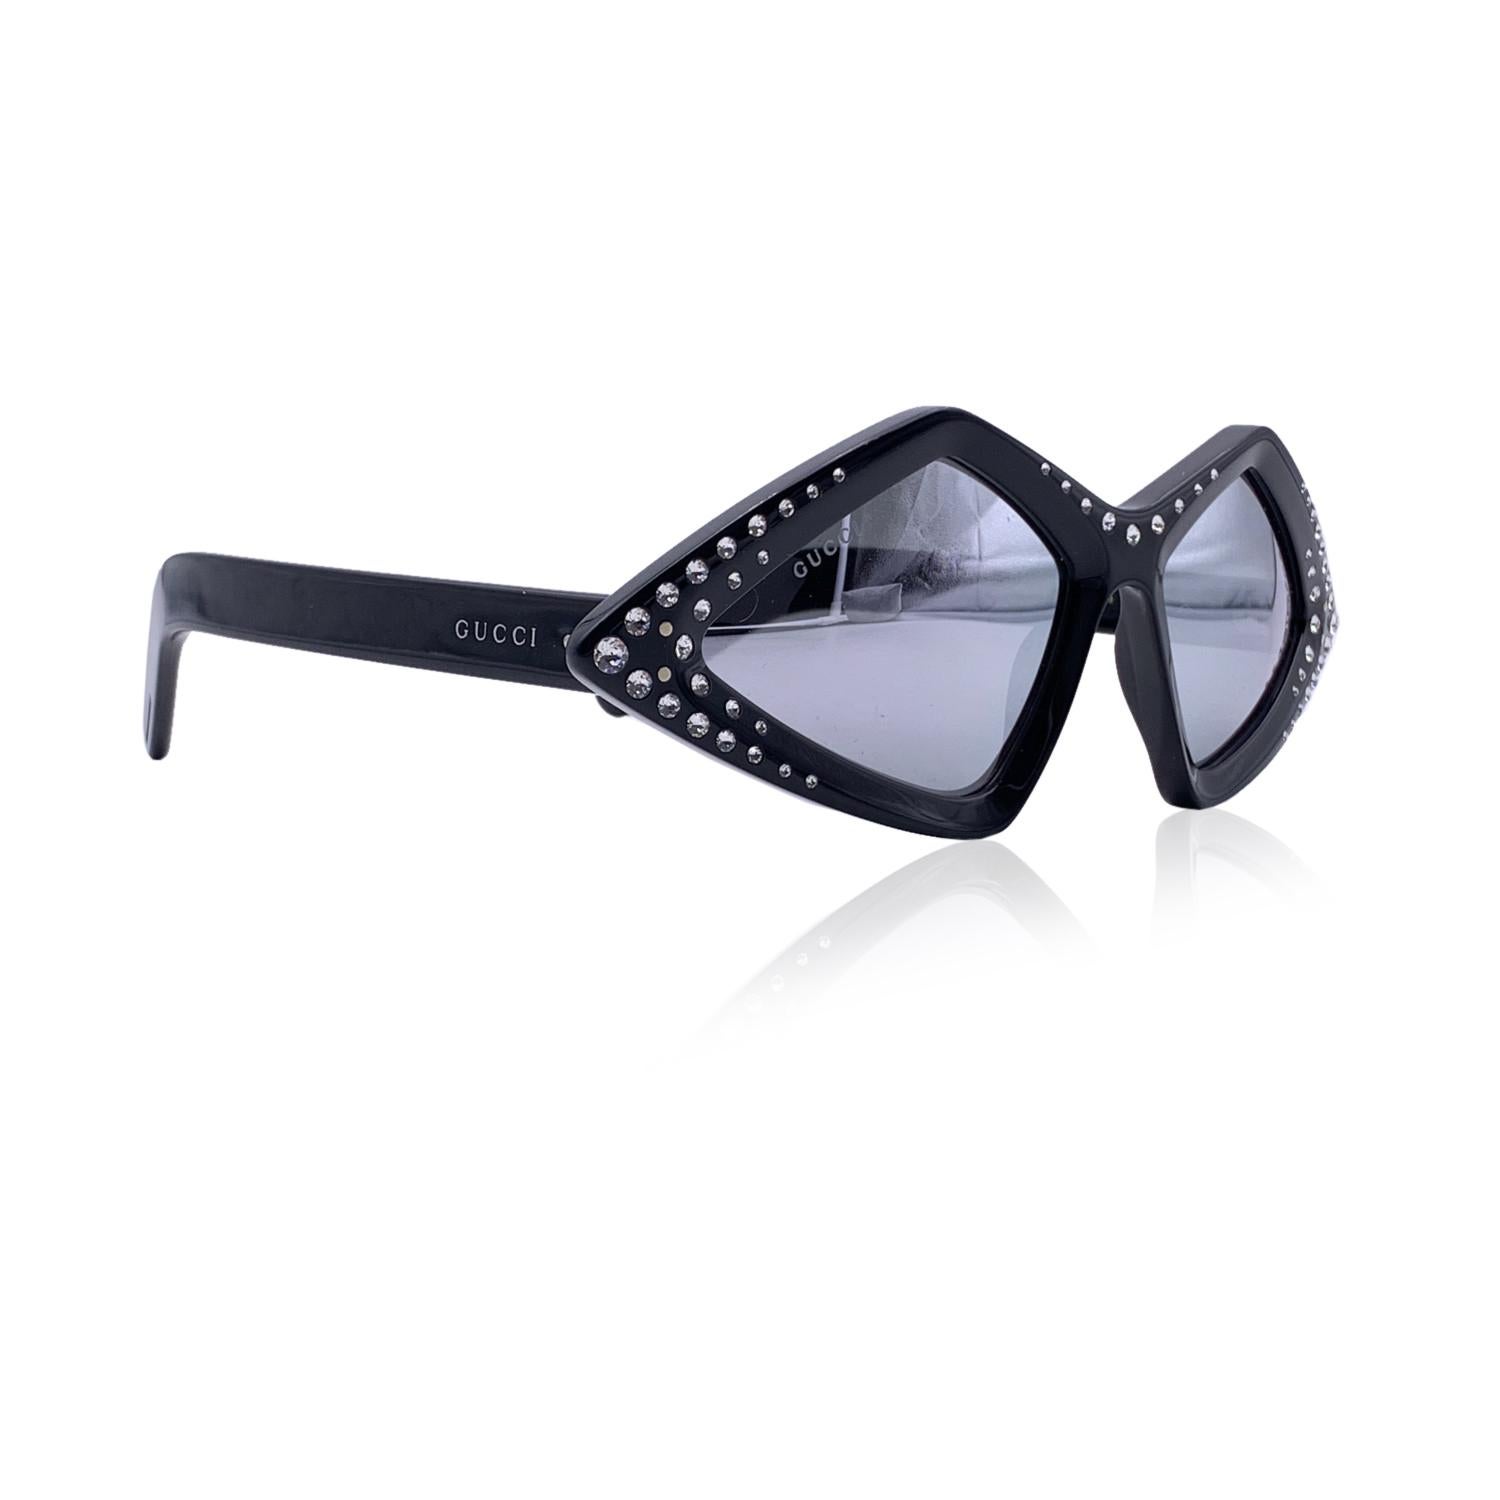 Gucci Sunglasses Model GG0496S - 004. Black acetate frame decorated with crystals. Gucci signatures on temples. Original mirrored grey lenses. Mod & refs: GG0496S - 004 - 59/18 - 145. Made in Italy

Details

MATERIAL: Acetate

COLOR: Black

MODEL: